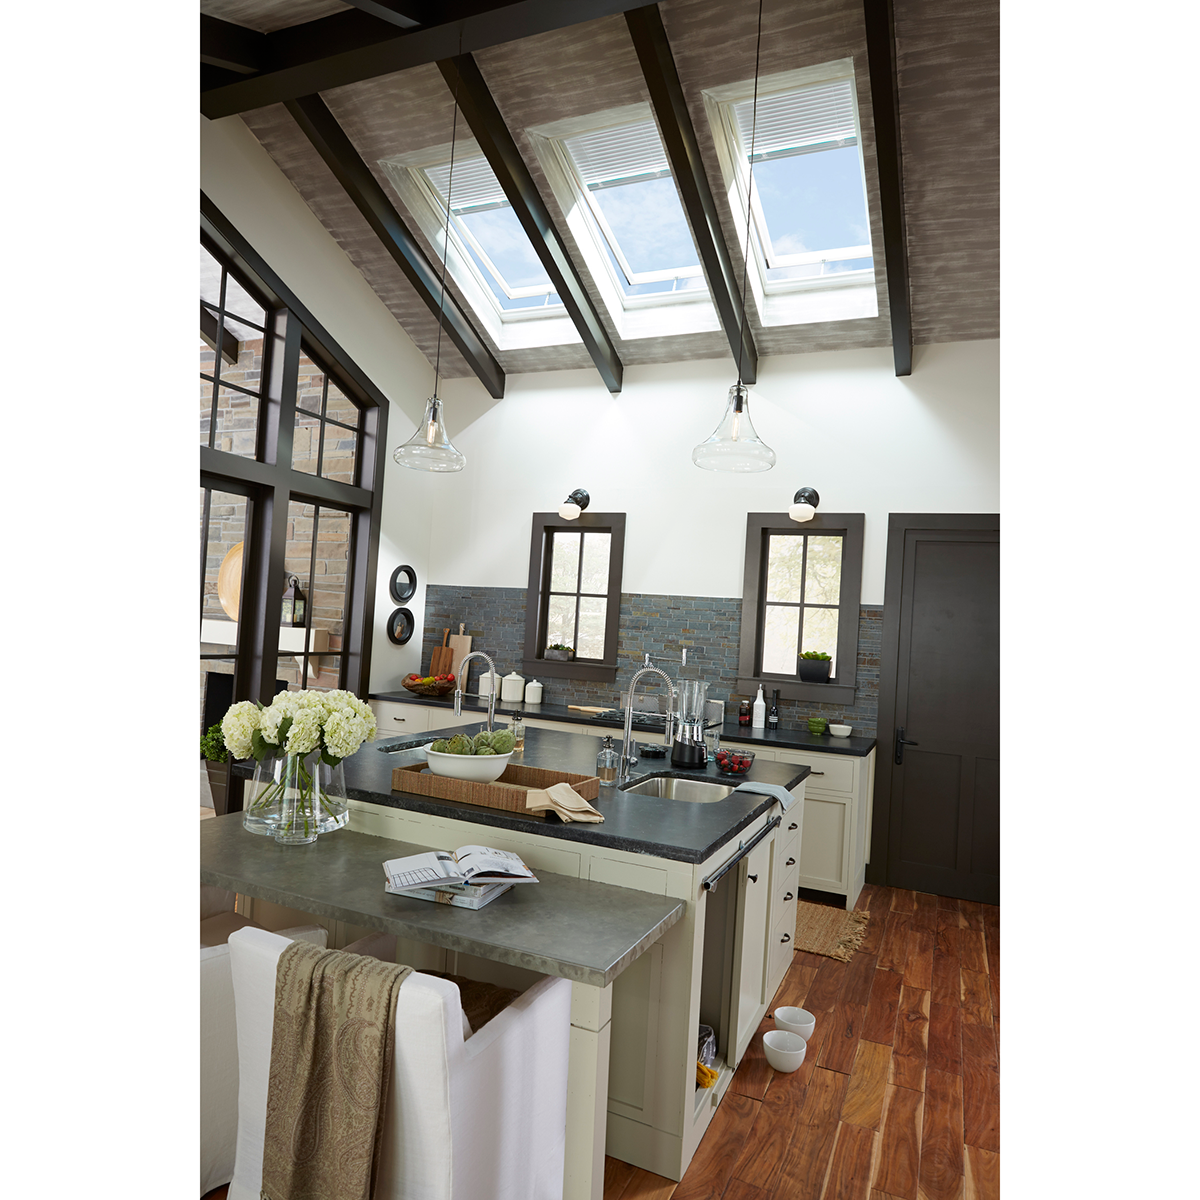 Manual Curb-Mount Skylight with Laminated Low-E3 Glass - 30-1/2 in. x 46-1/2 in. - VCM 3046